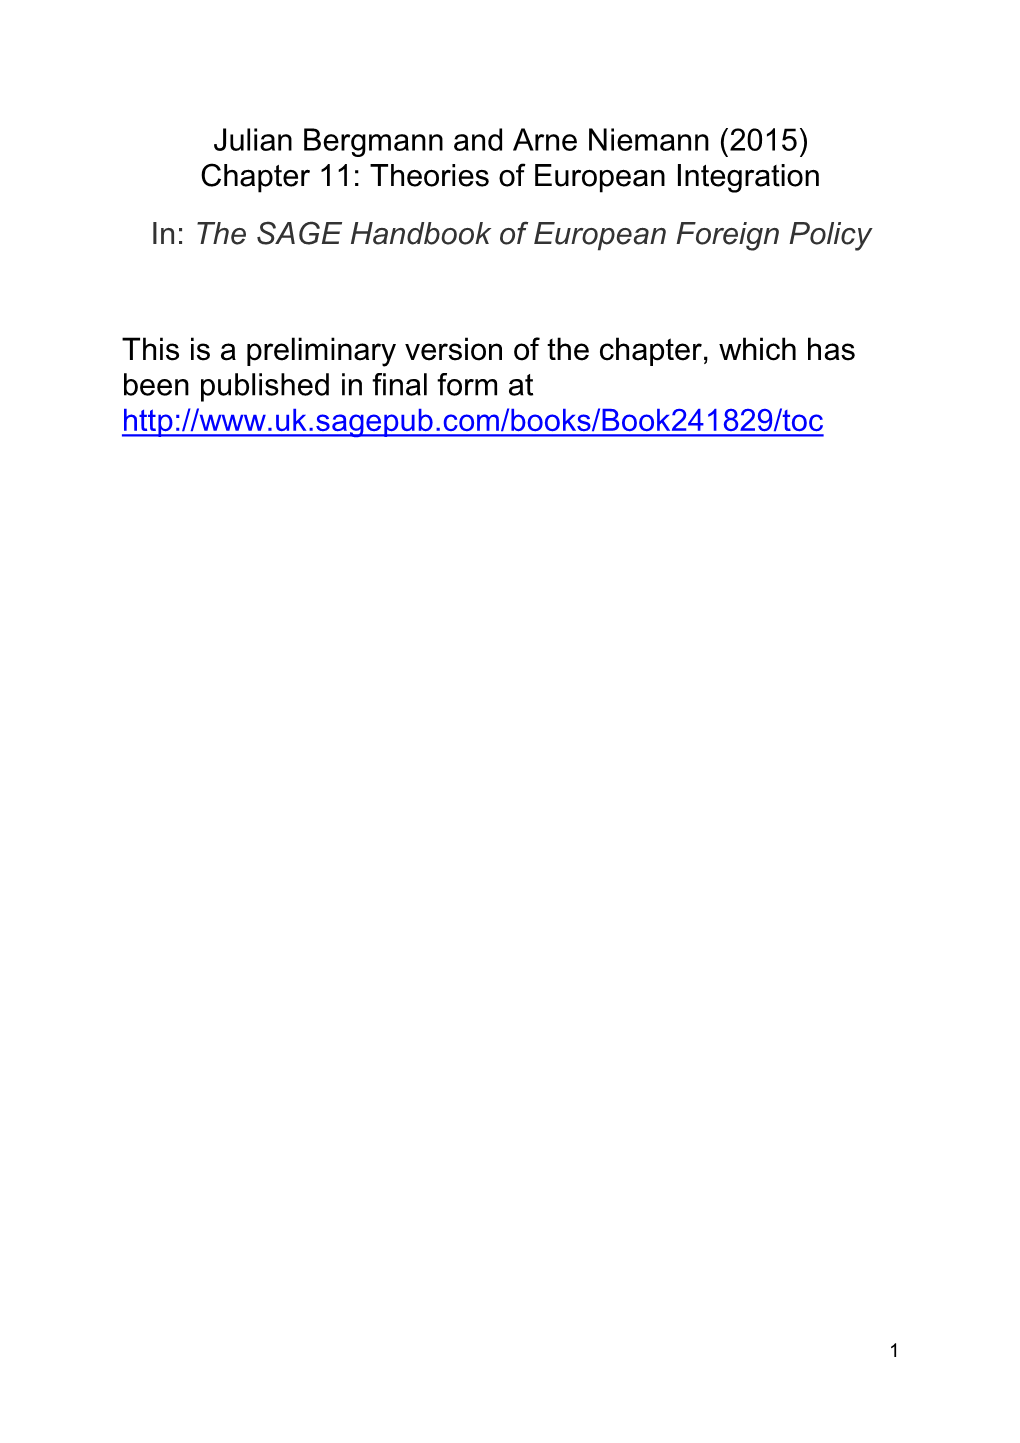 Chapter 11: Theories of European Integration In: the SAGE Handbook of European Foreign Policy